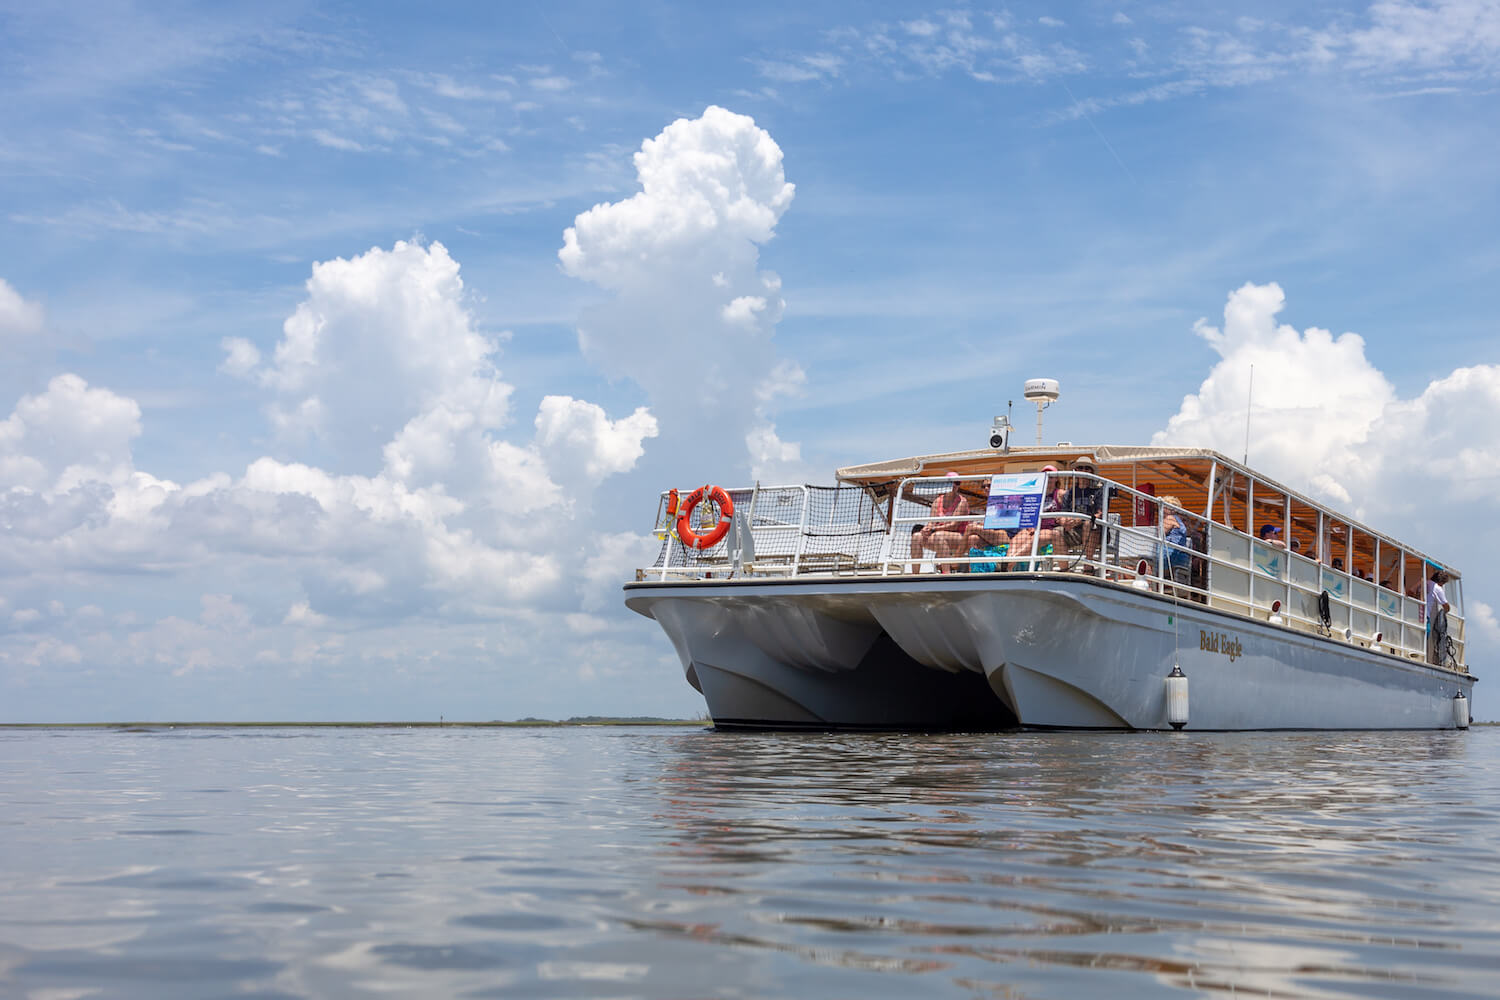 Book online to ride the Bald Eagle on the intracoastal